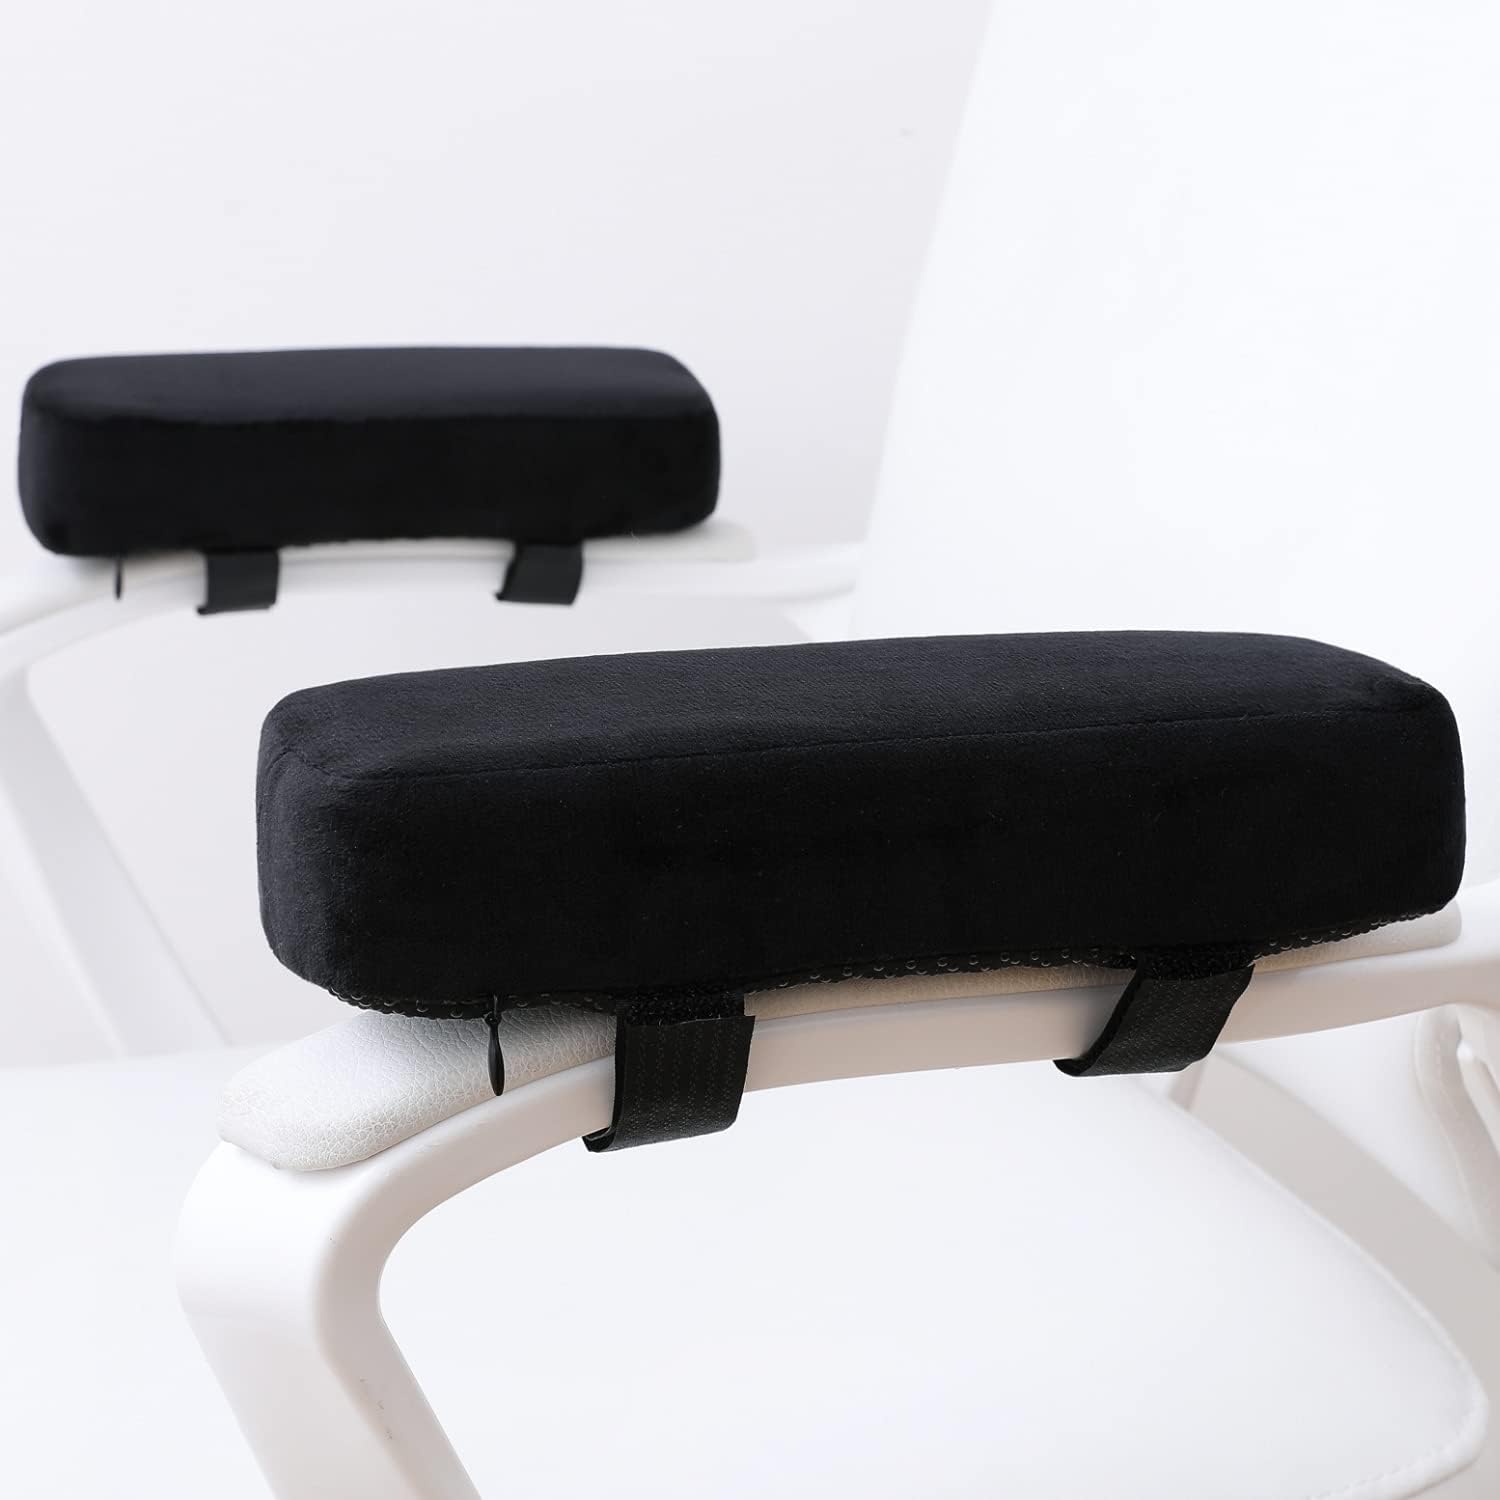 AMGAMING Ergonomic Chair Arm Pads, 11 Latex Foam Arm Covers for Gaming,  Office, Computer, and Desk